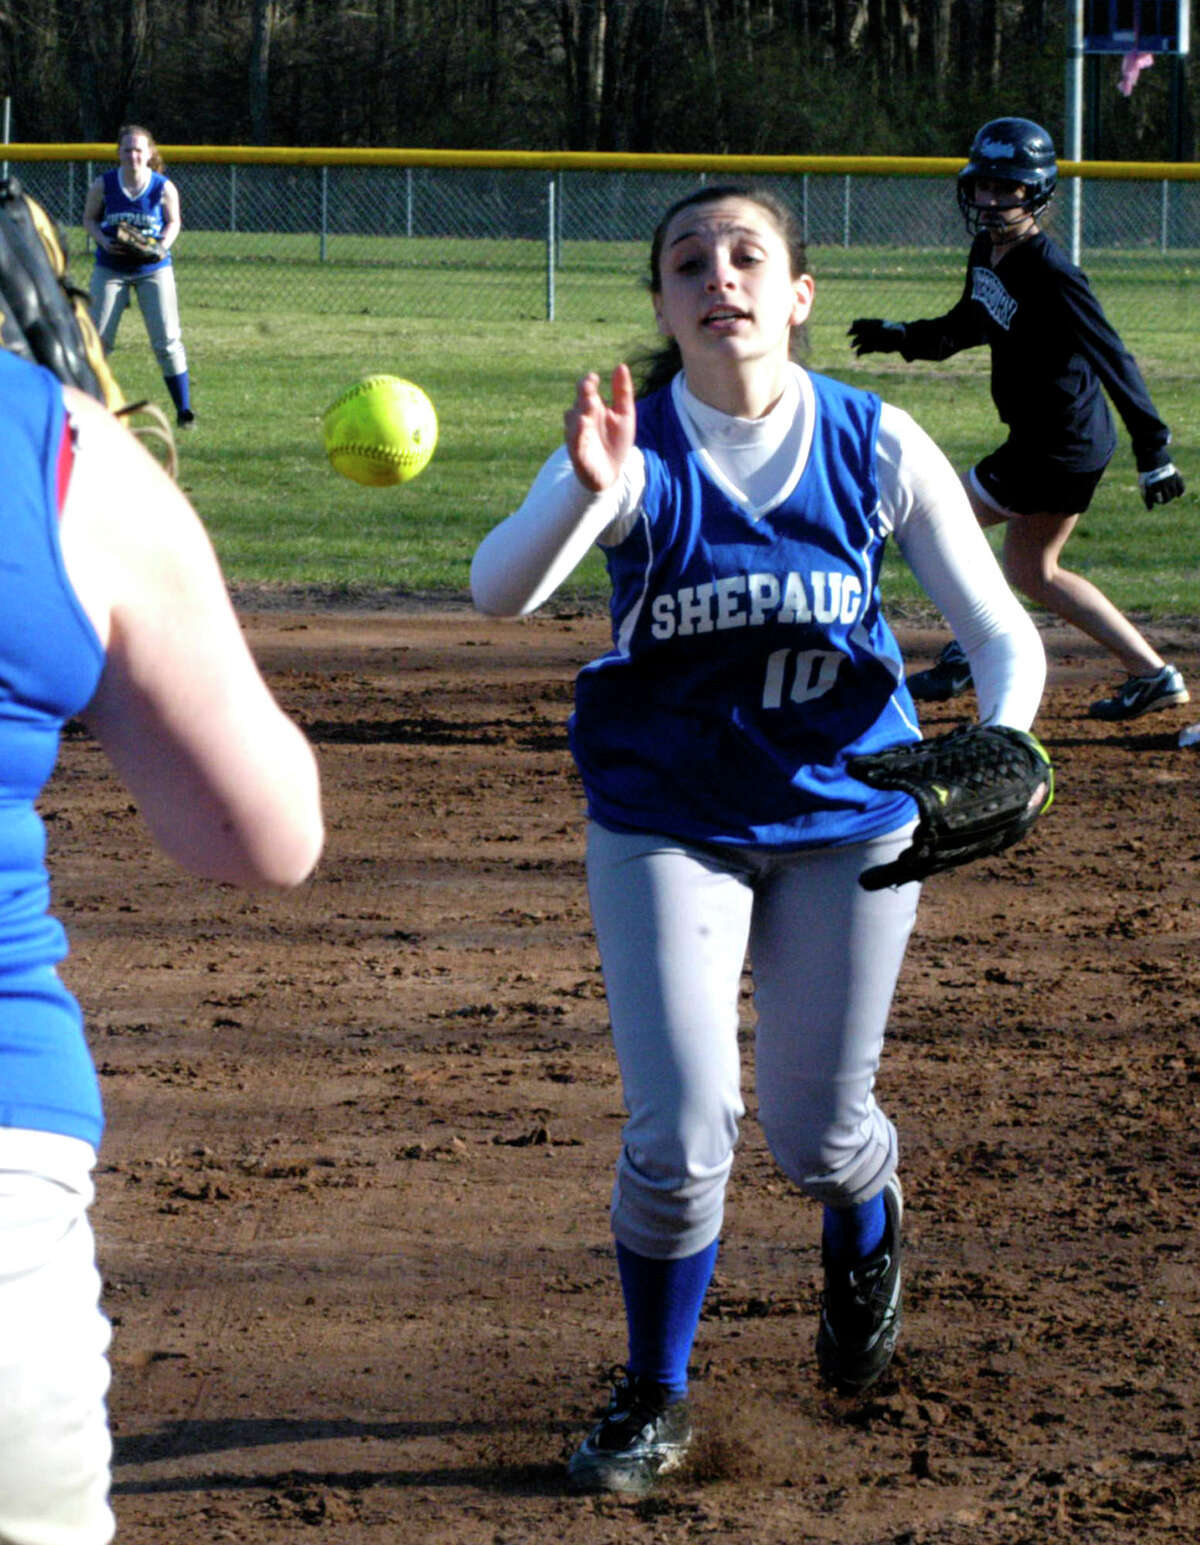 SPECTRUM/Spartan second baseman Kate DeWitte makes an accurate flip to first base to get a runner during pre-season for Shepaug Valley HIgh School softball, April 2012.